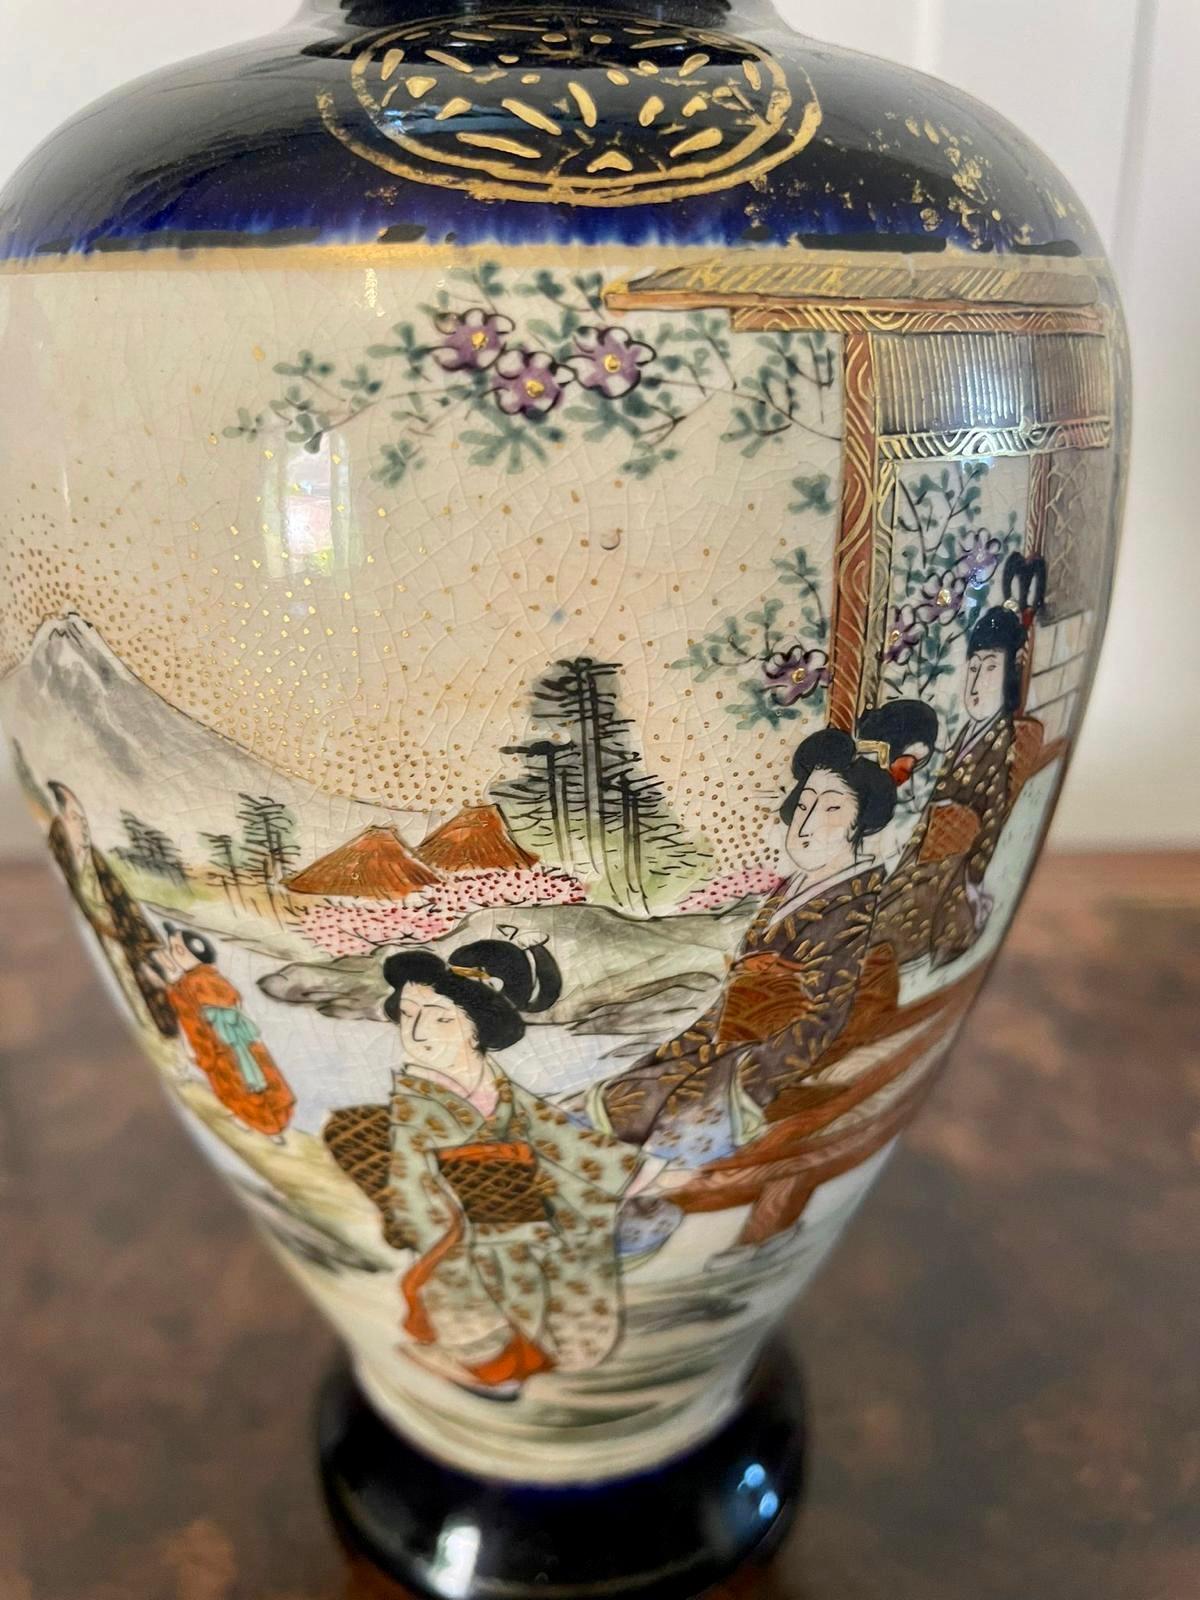 Quality antique pair of satsuma vases boasting wonderful gilded decoration with hand painted Geishas. Beautifully painted.

A fabulous pair boasting beautiful colours and in perfect original condition.

Measures: H 18cm x W 10cm x D 10cm
Date